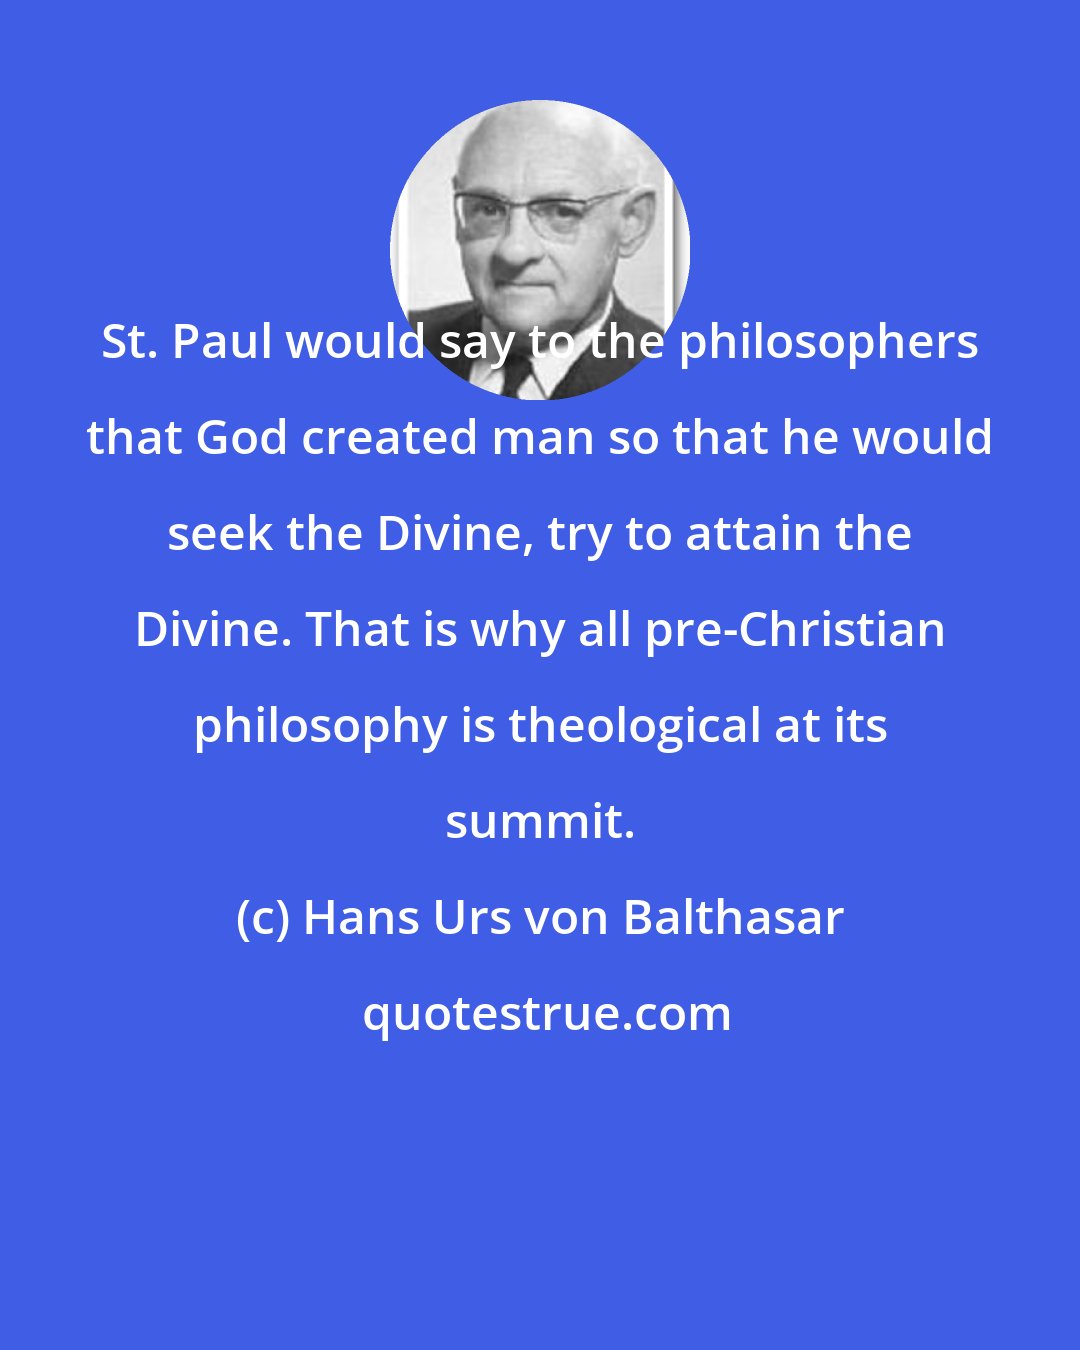 Hans Urs von Balthasar: St. Paul would say to the philosophers that God created man so that he would seek the Divine, try to attain the Divine. That is why all pre-Christian philosophy is theological at its summit.